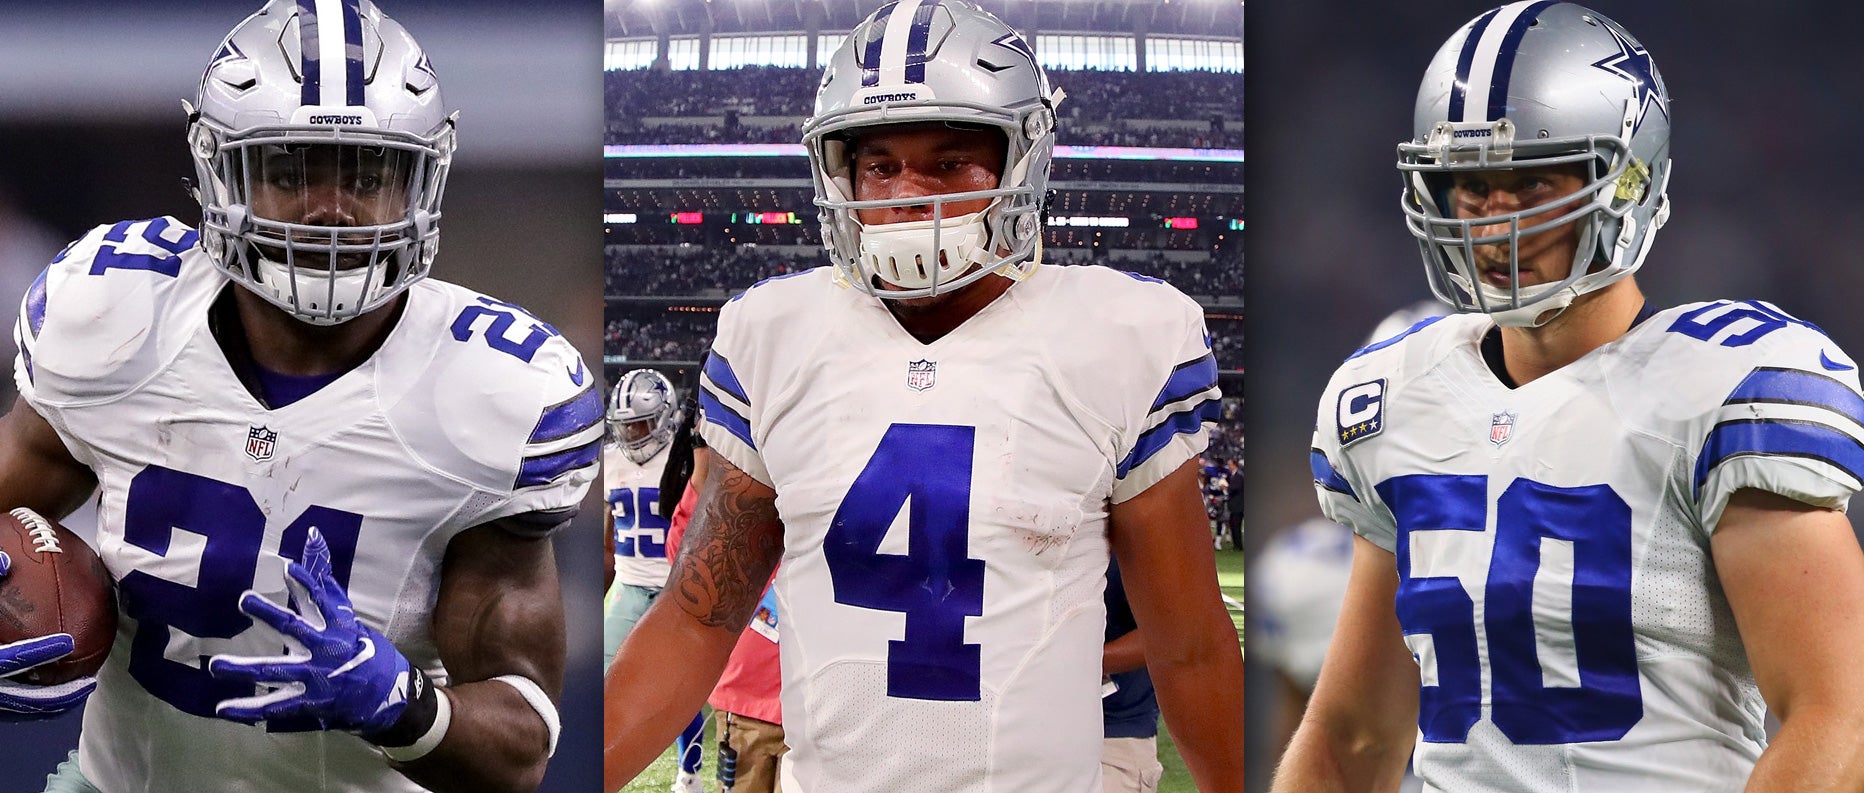 NFC East Notebook: Cowboys join in on the throwback uniforms - Big